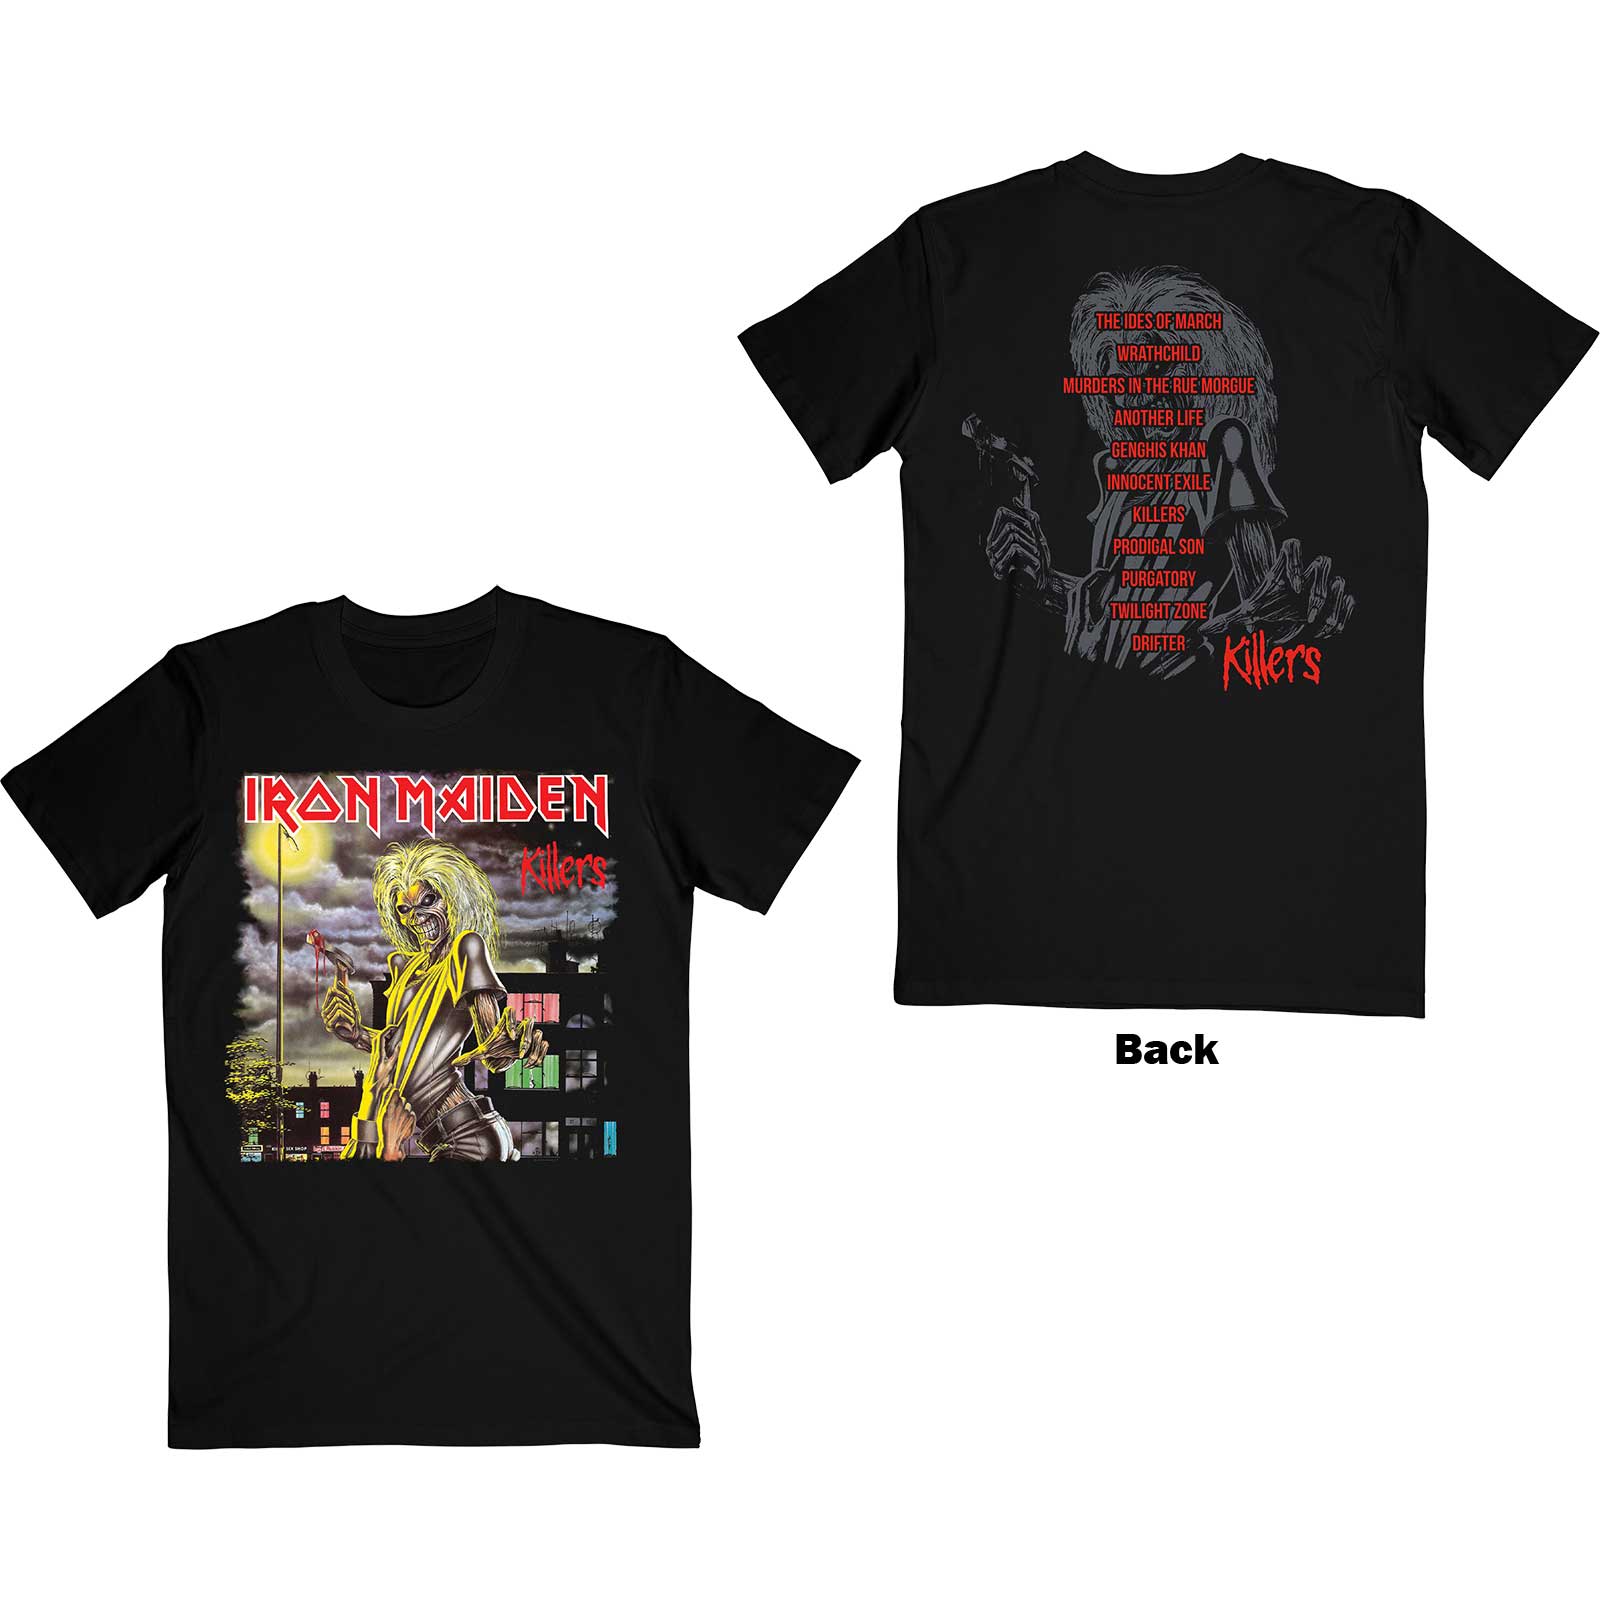 Iron Maiden T-Shirt - Killers Album Cover With Back Print (Unisex) - Front and Back